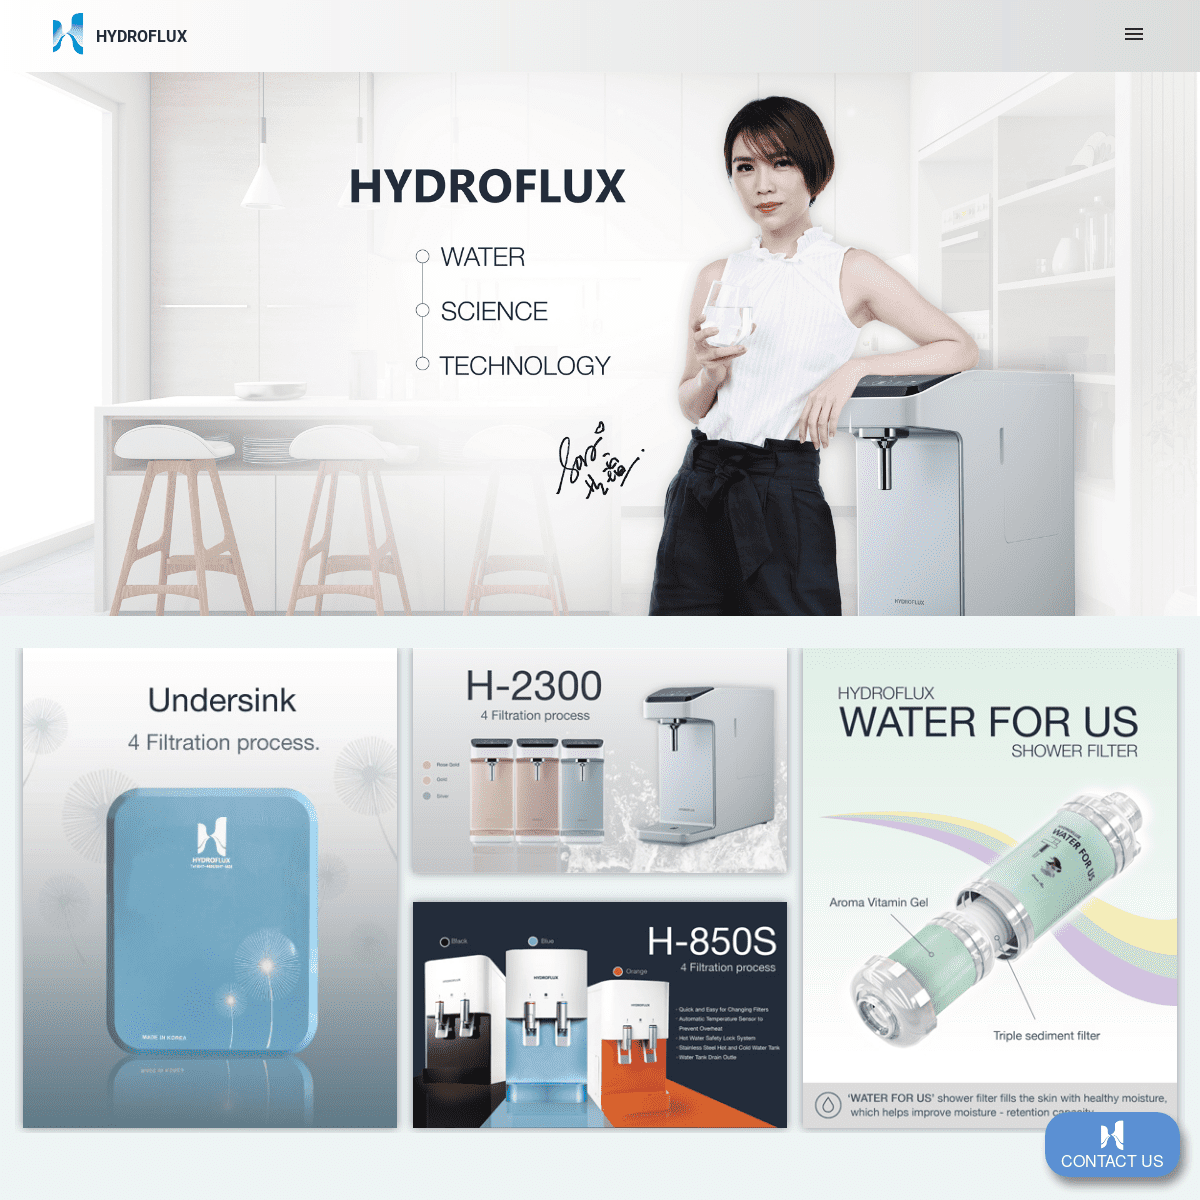 A complete backup of hydroflux.com.sg